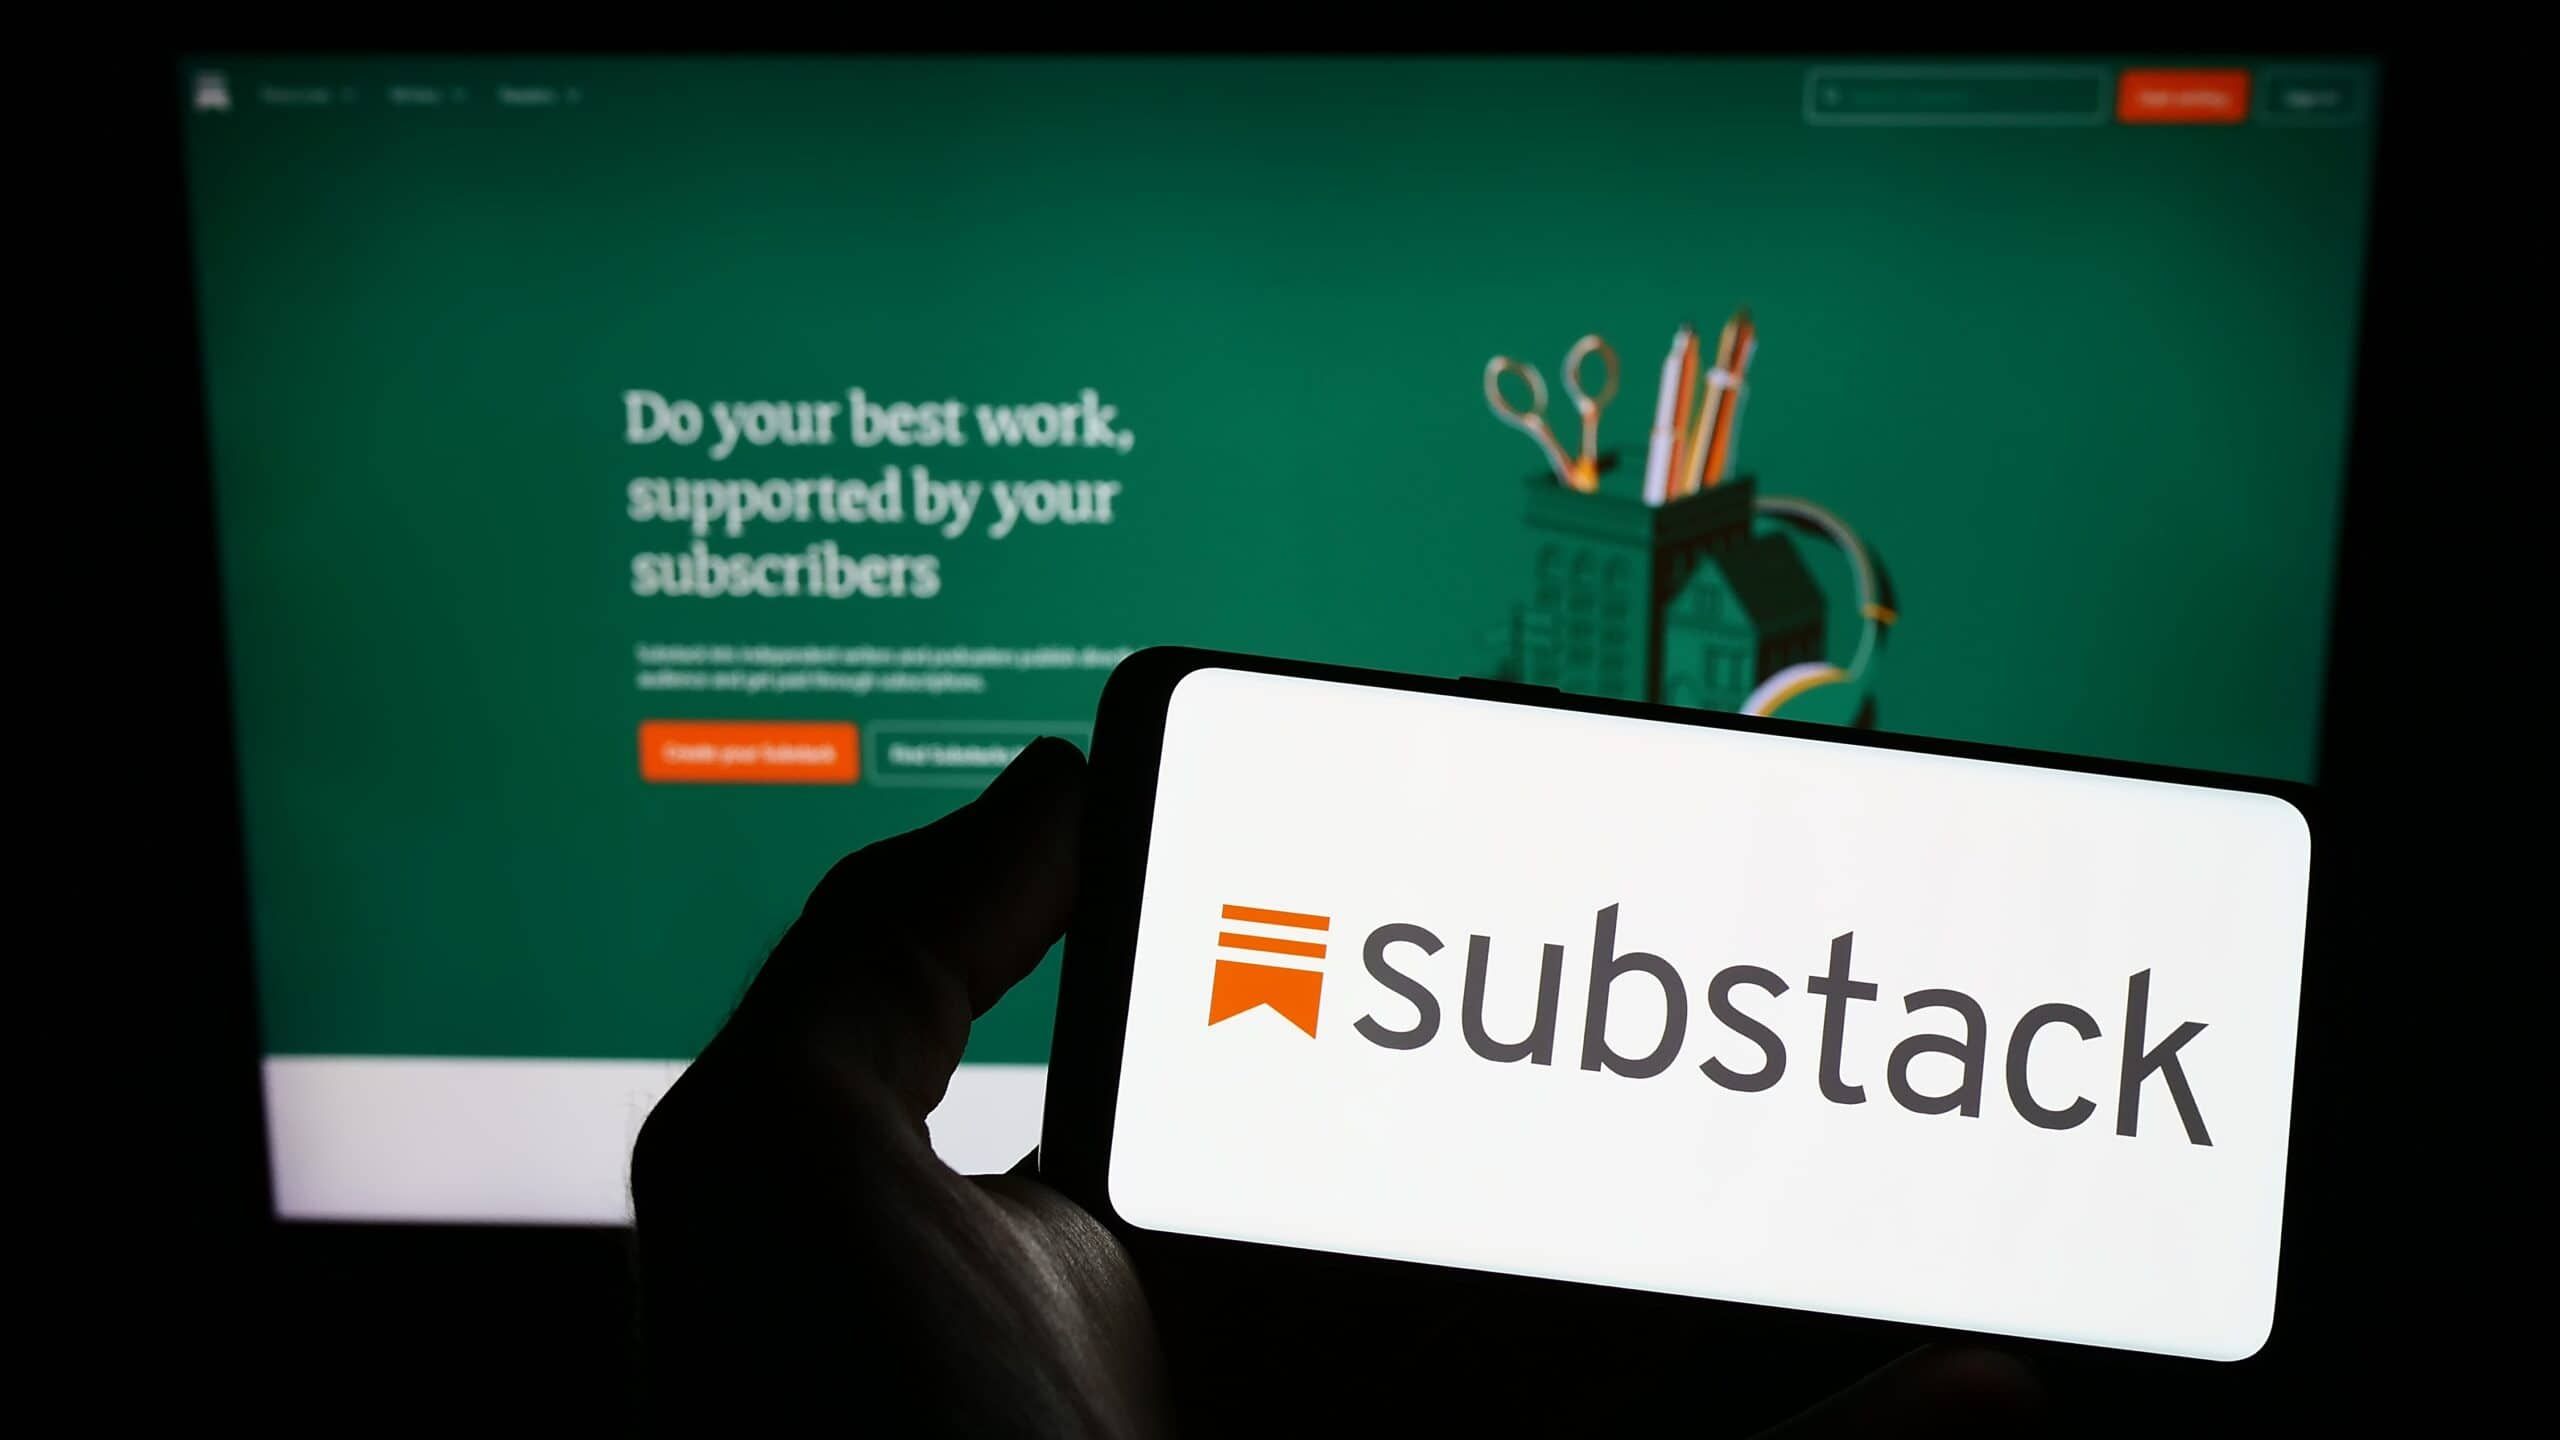 substack-introduces-ai-powered-transcription-tools-for-podcasters